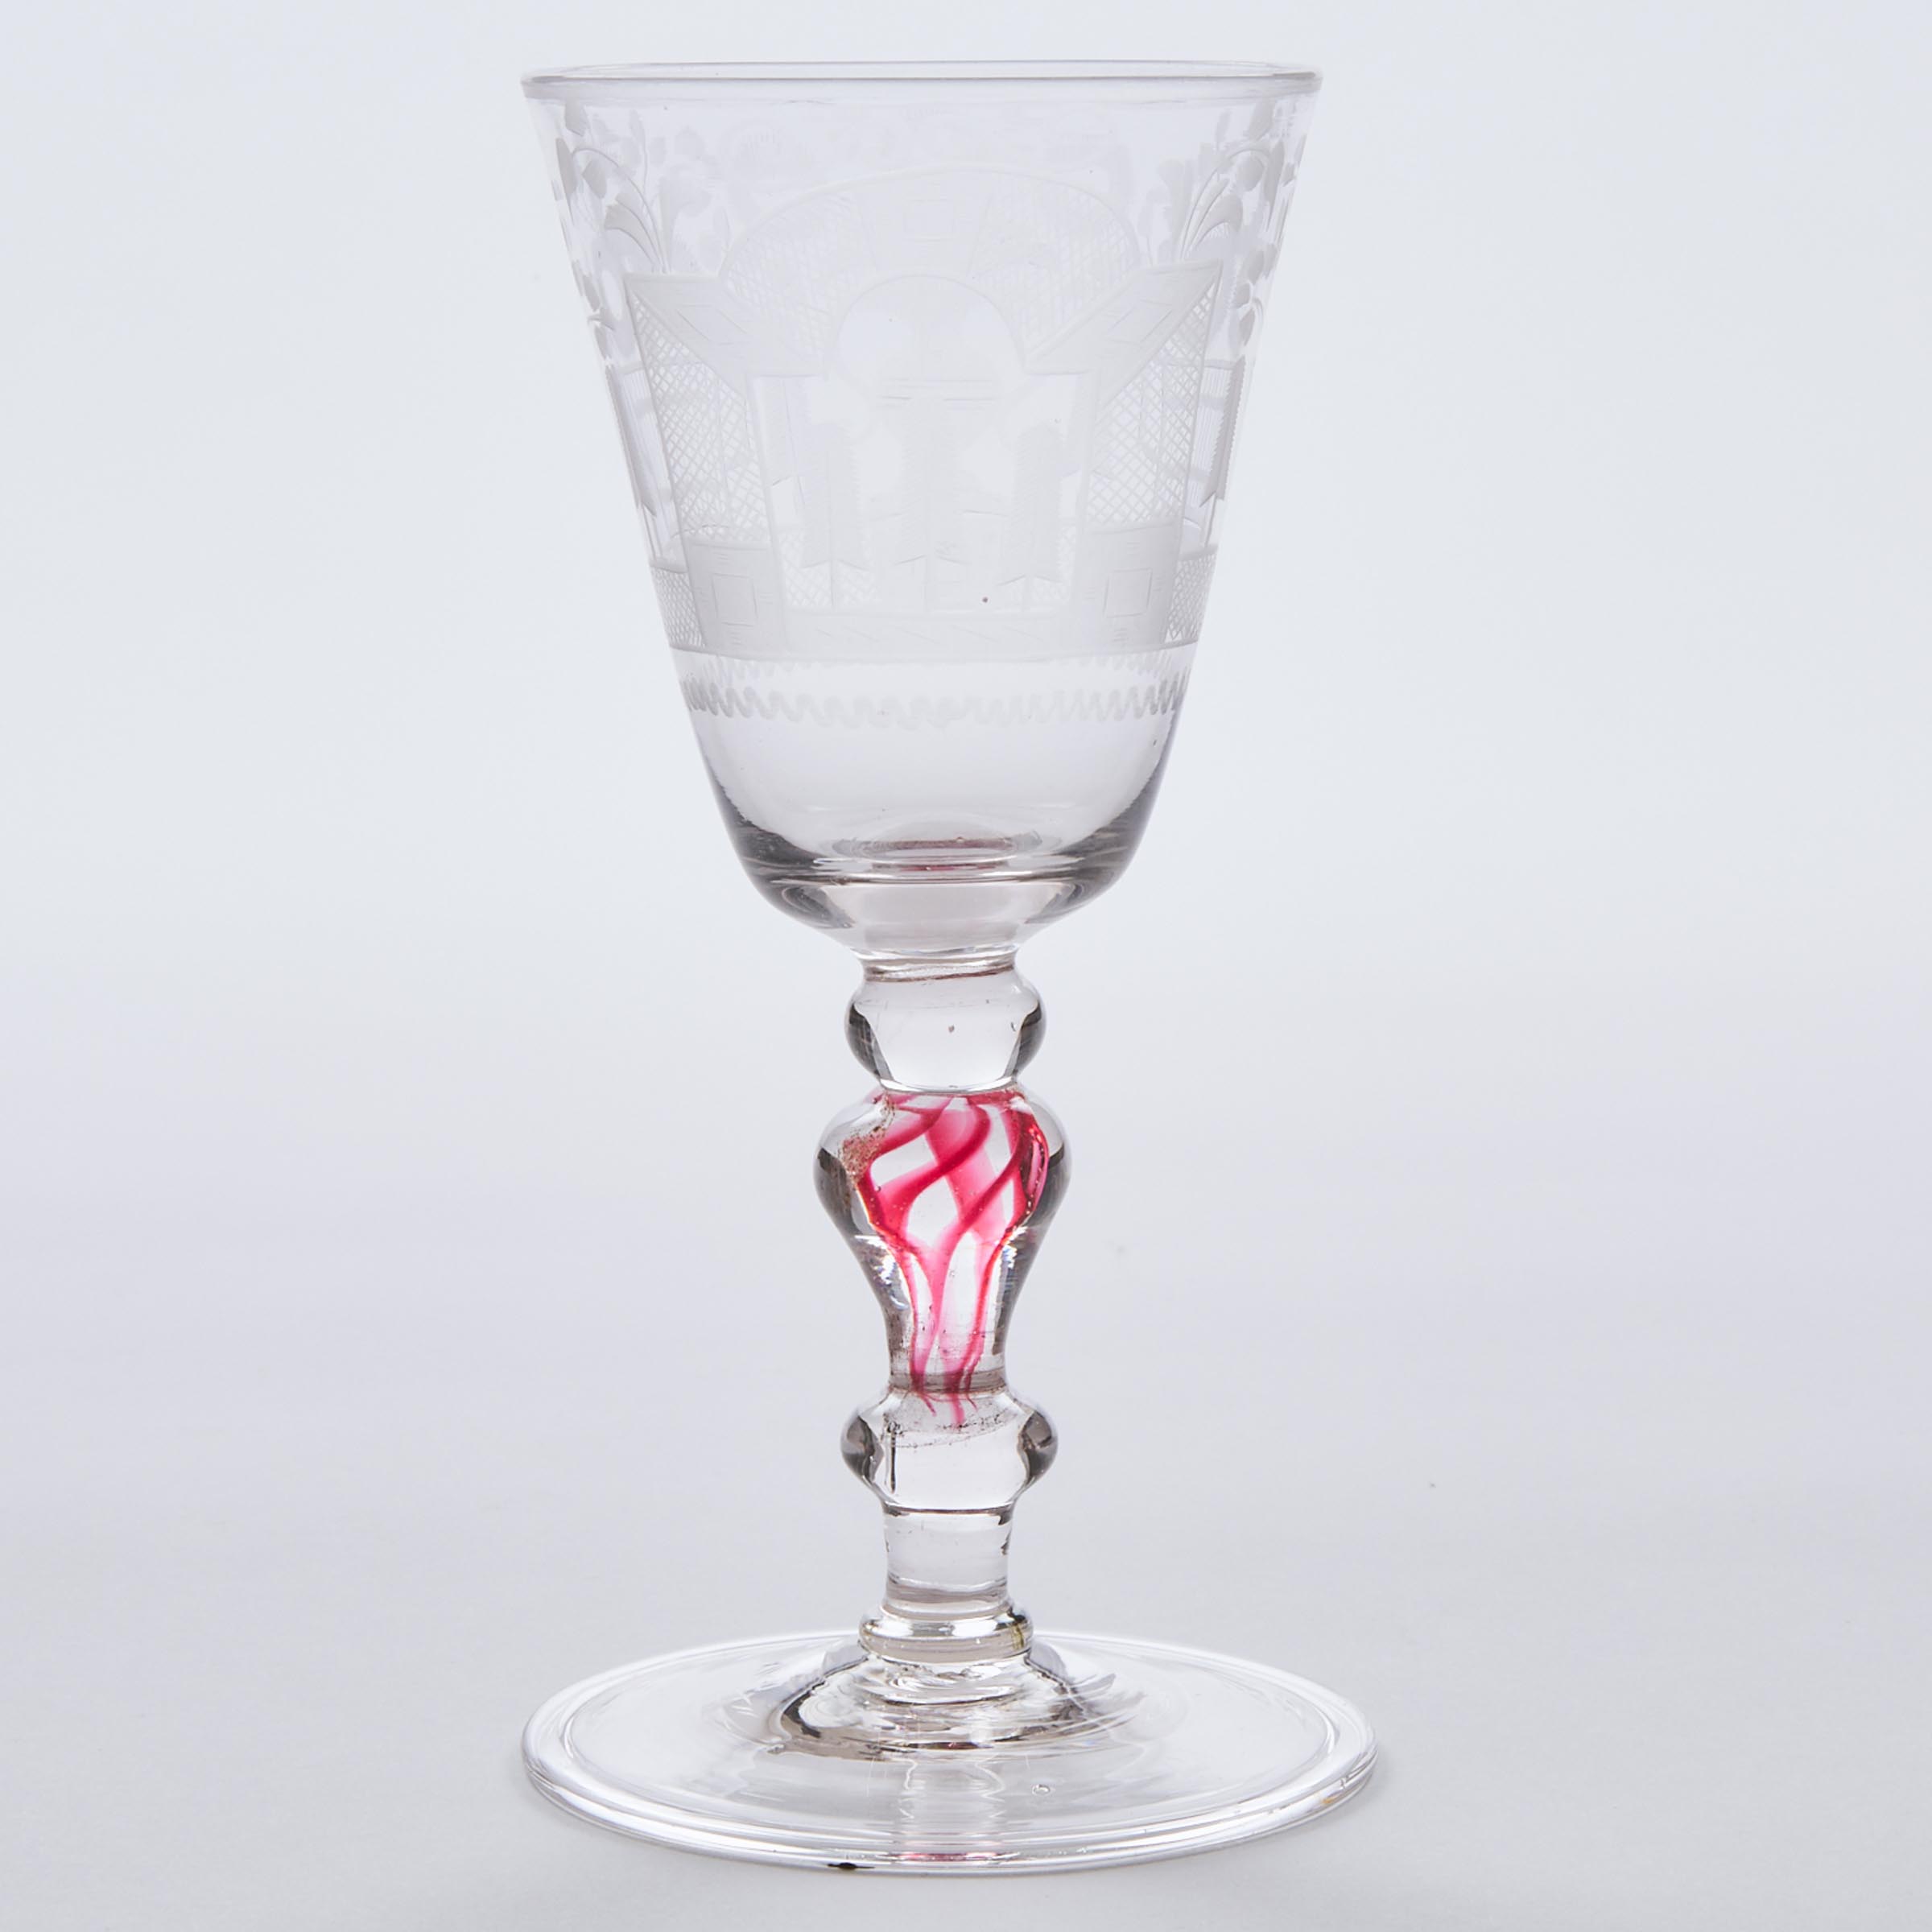 Bohemian Red Twist Stemmed Engraved Wine Glass, early 18th century